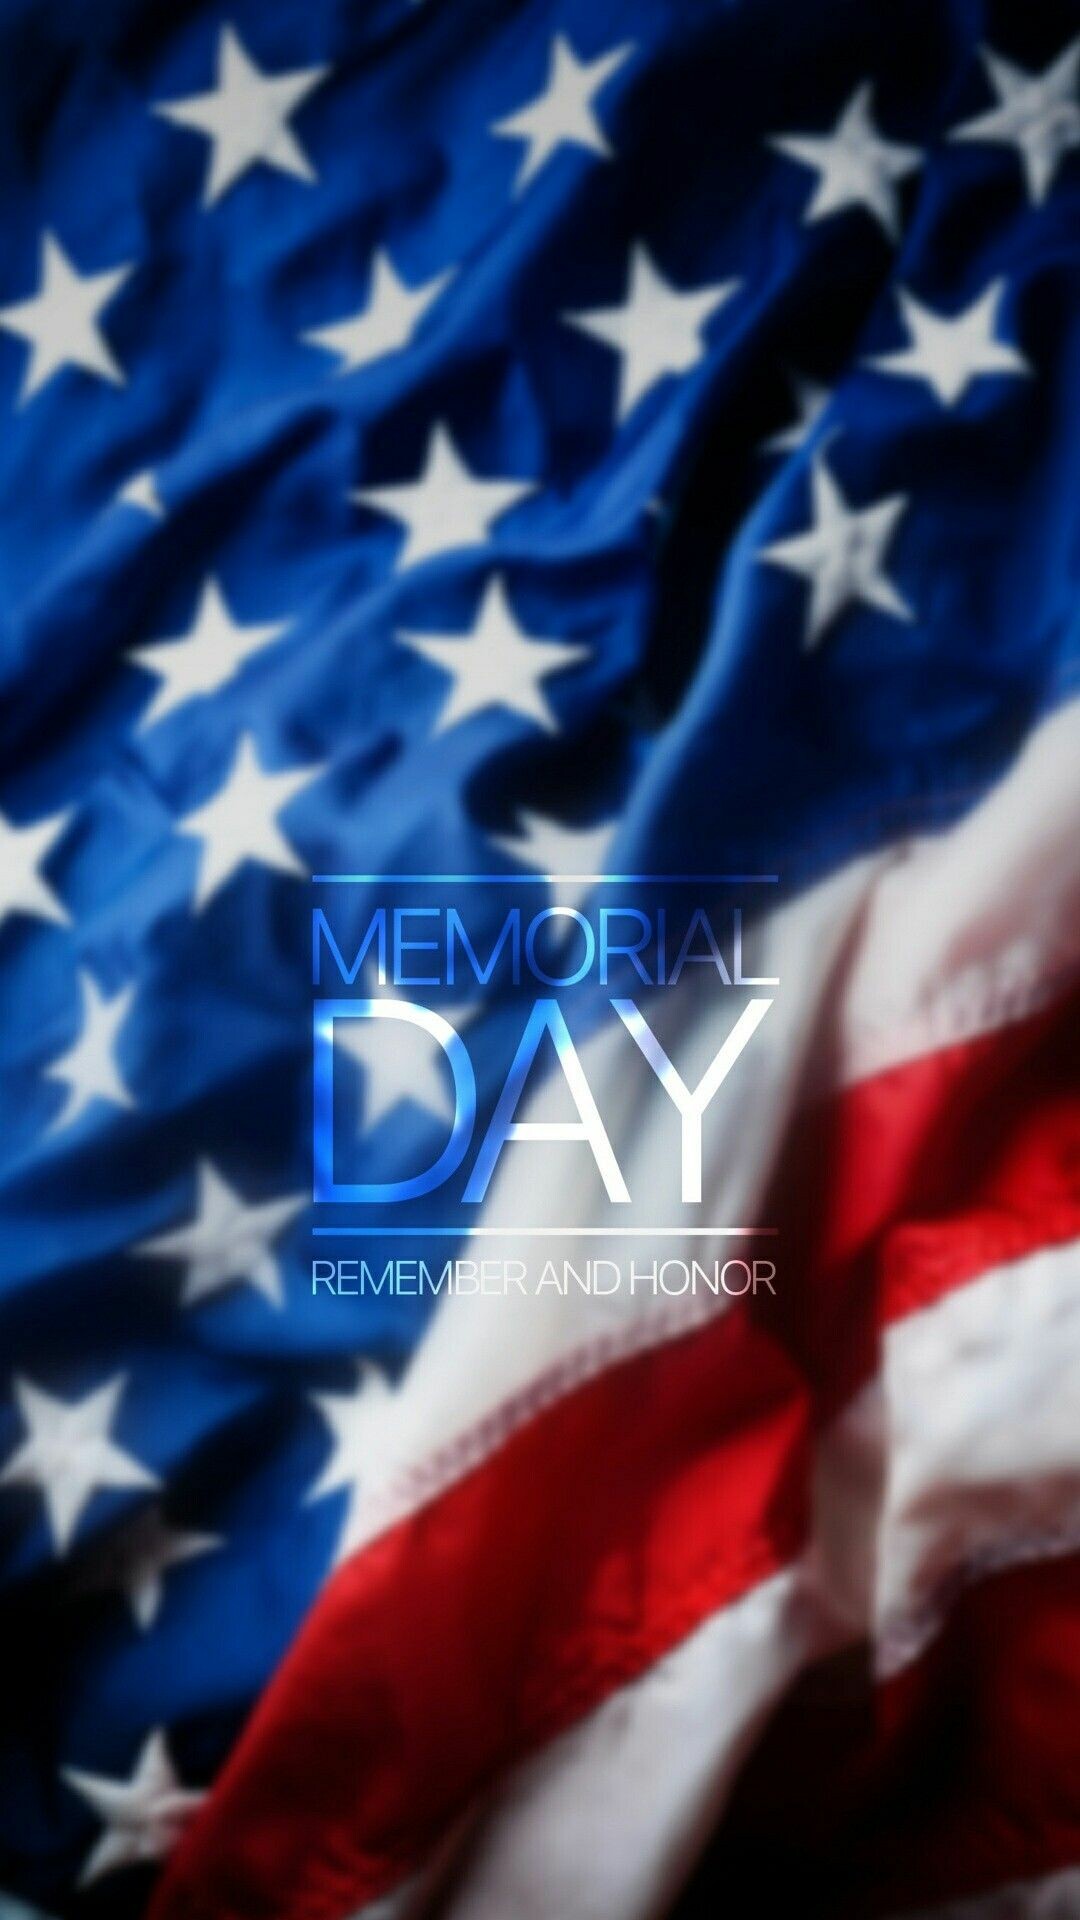 Memorial Day: The holiday evolved to commemorate American military personnel who died in all wars, including World War II, The Vietnam War, The Korean War, and the wars in Iraq and Afghanistan. 1080x1920 Full HD Wallpaper.